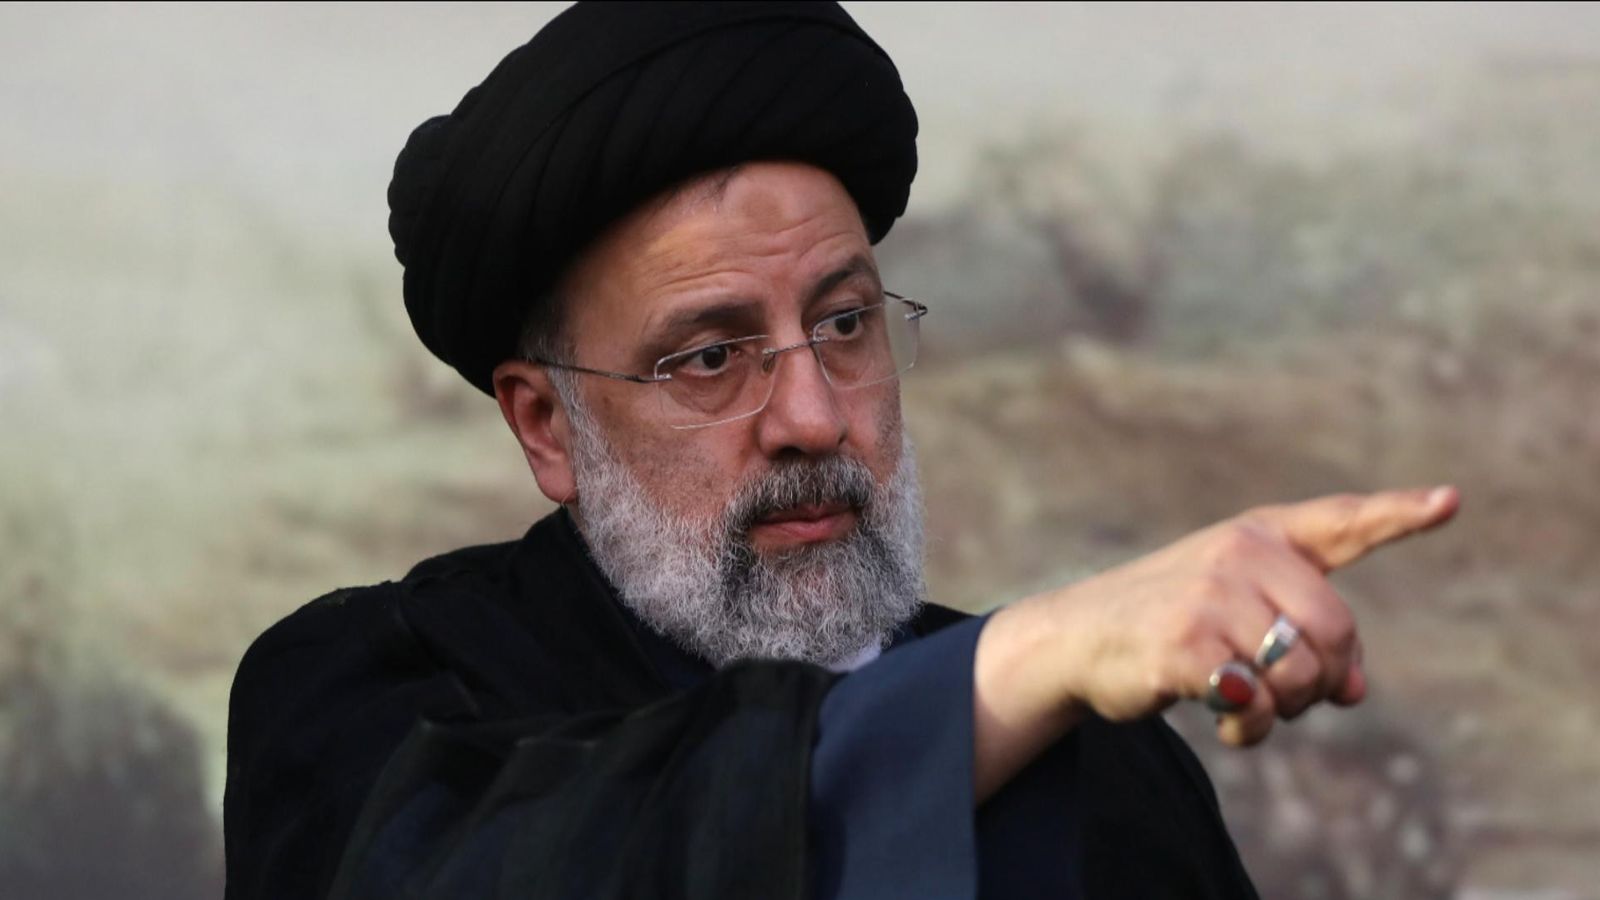 Iranian President Ebrahim Raisi confirmed dead in helicopter crash after charred wreckage found